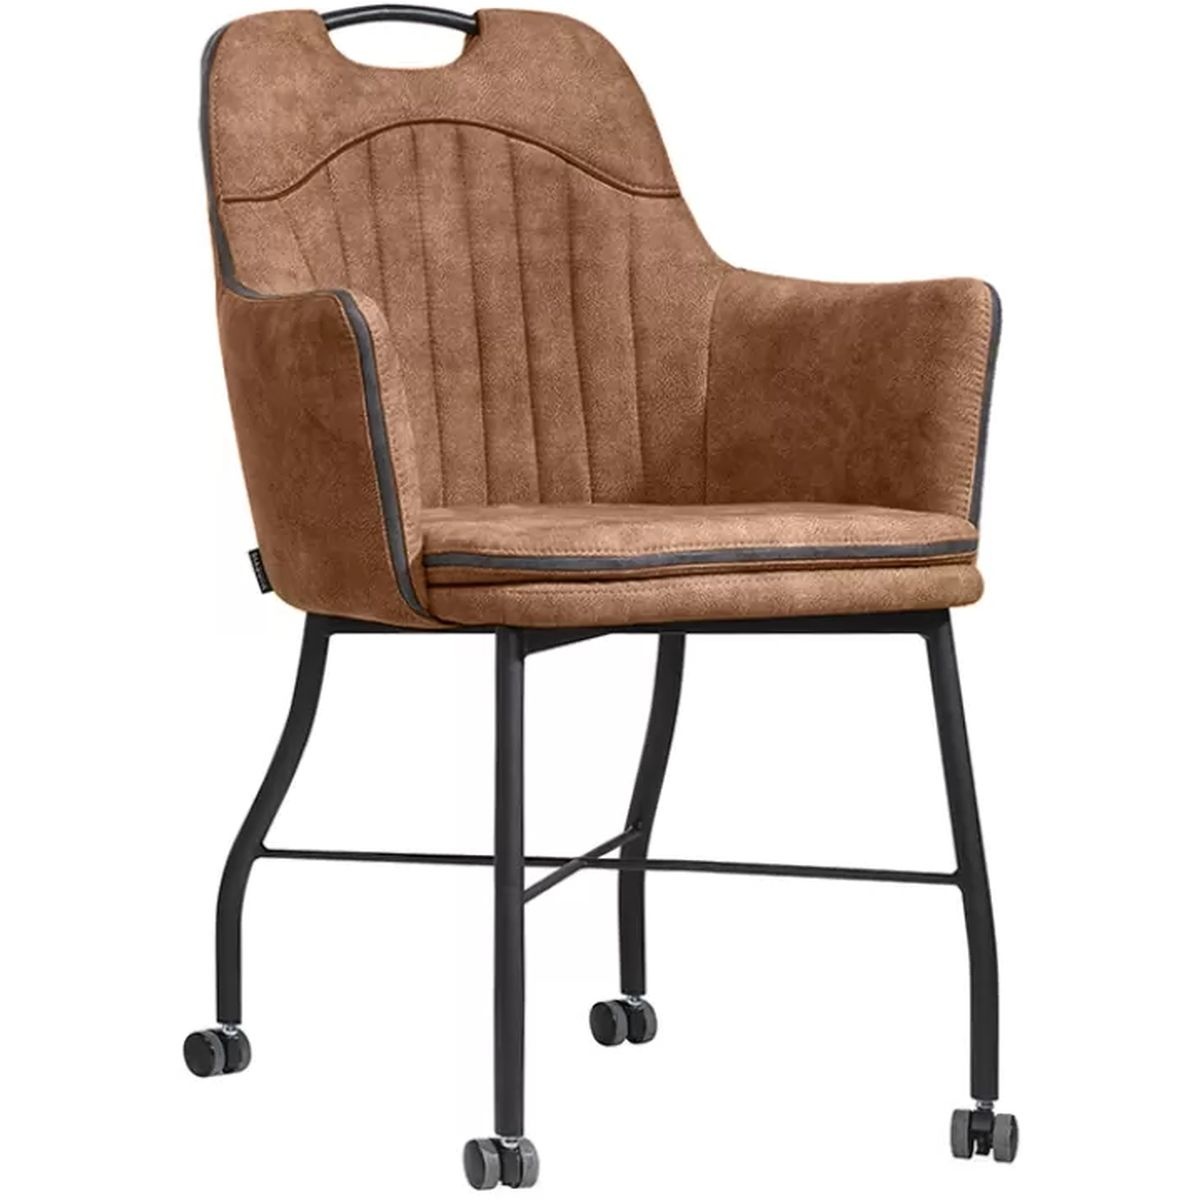 MX Sofa chair with wheels, available in 4 colors - Decomeubel